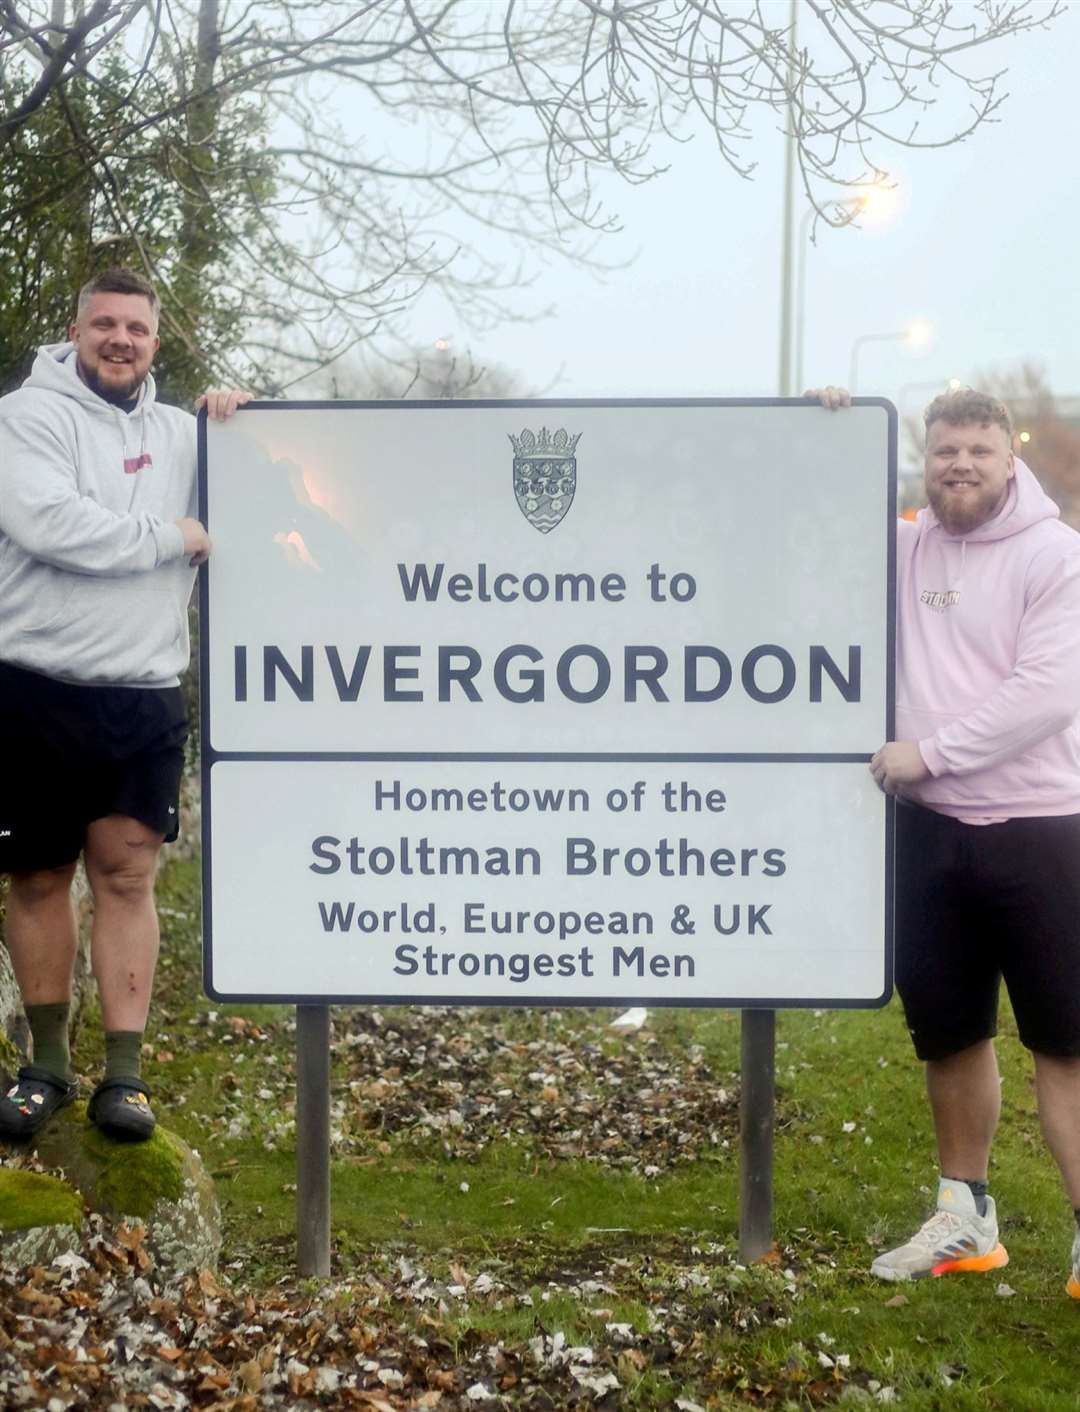 The Strongman Stoltman brothers at the new Welcome to Invergordon sign made in their honour: Luke Stoltman, Europe's Strongest Man and Tom Stoltman, UK's and World's Strongest Man, .  Pictured: James Mackenzie.